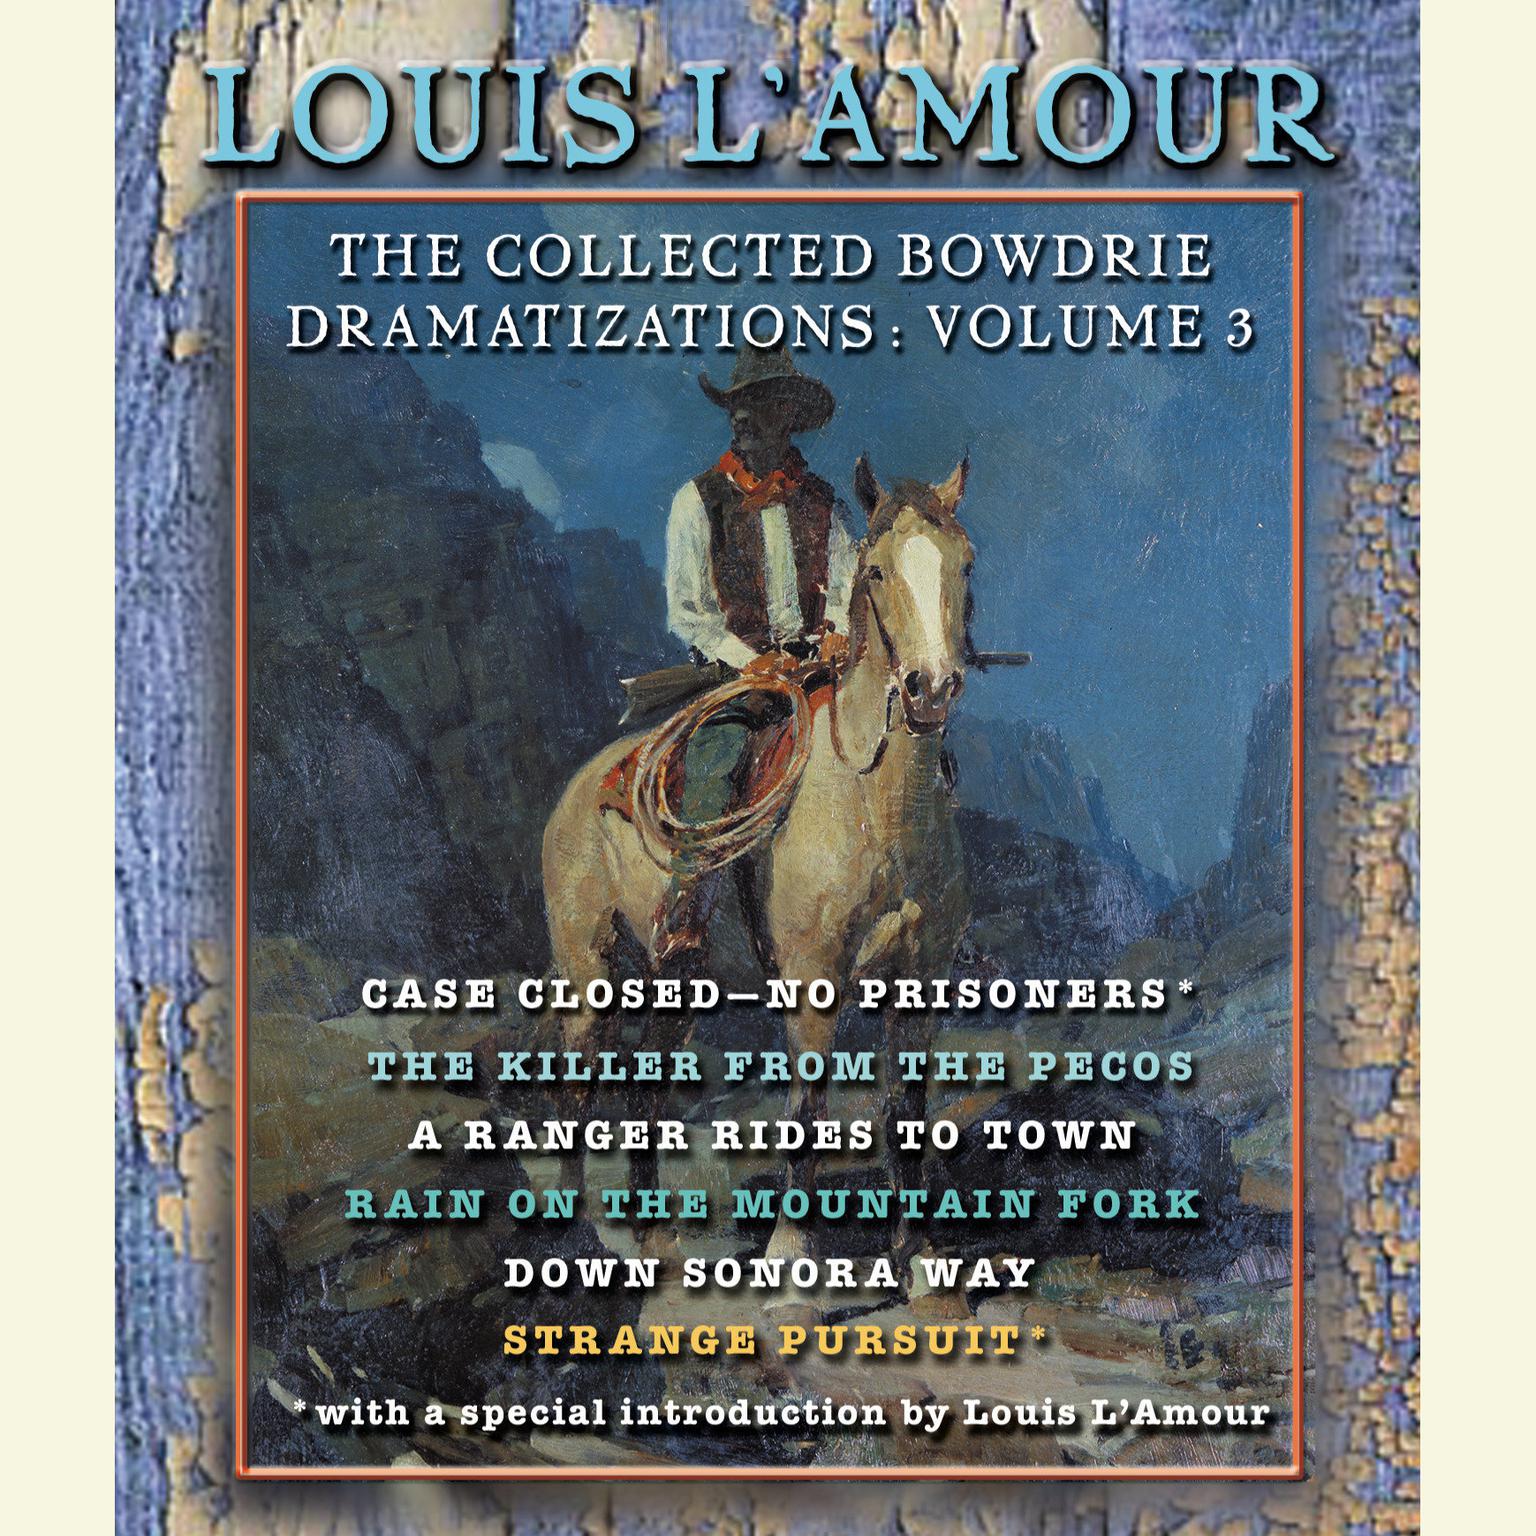 The Collected Bowdrie Dramatizations: Volume III Audiobook, by Louis L’Amour